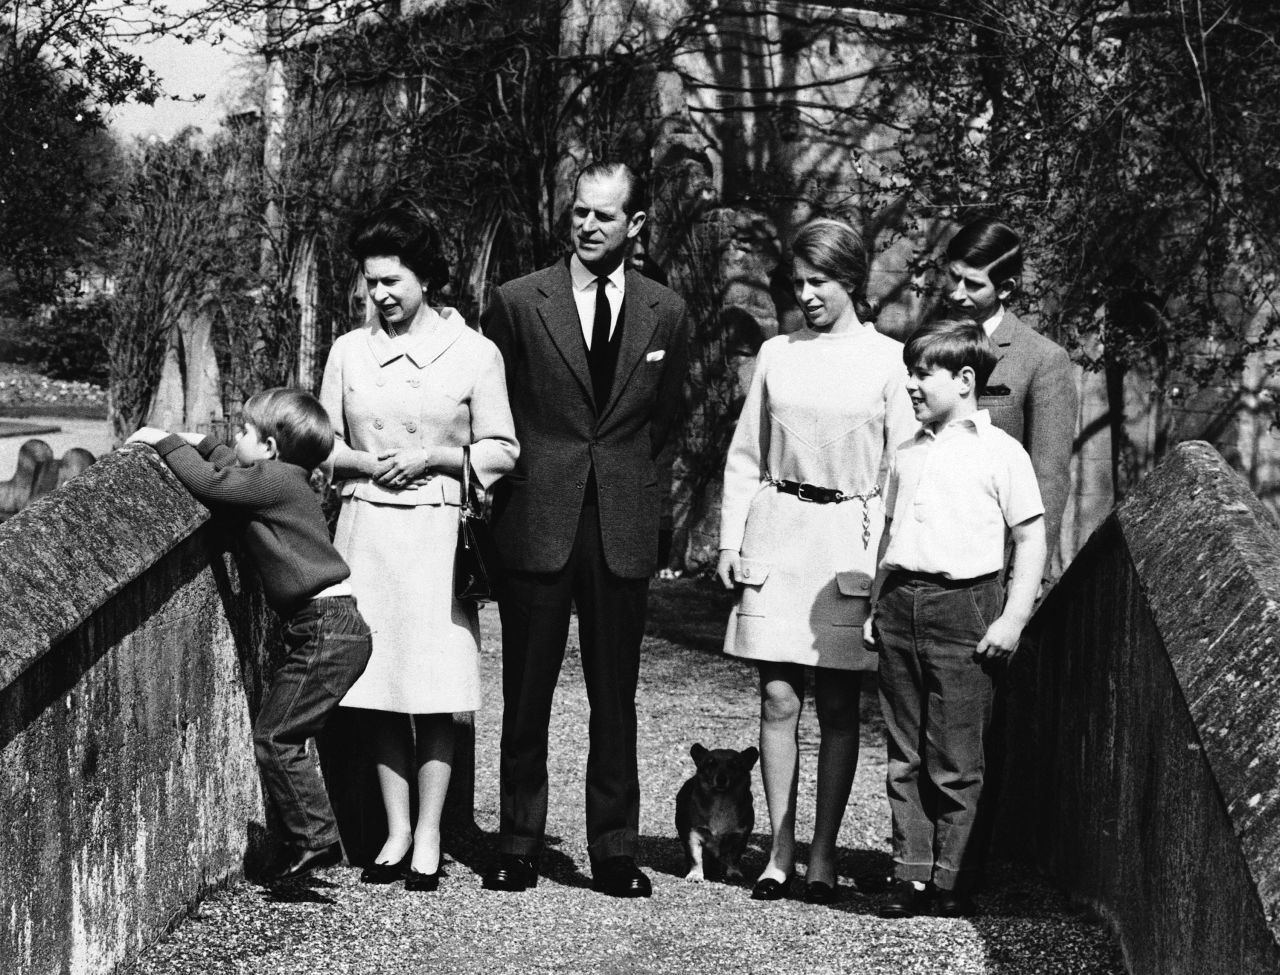 The royal family poses for photos in 1968. Prince Andrew is at bottom right. He is joined by his parents and his three siblings, including his younger brother, Prince Edward.